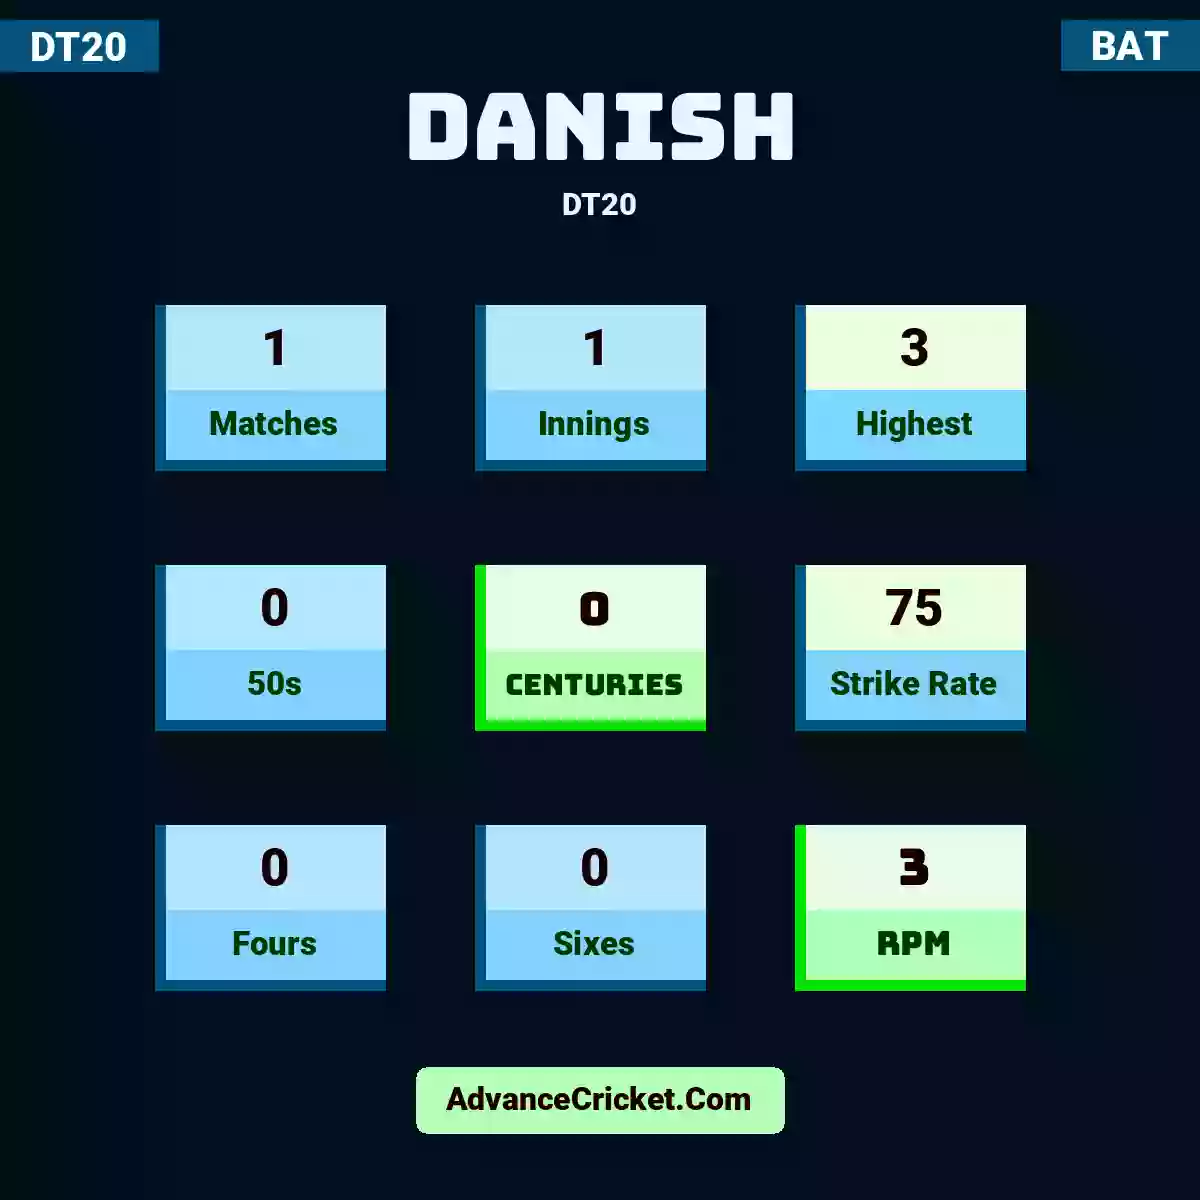 Danish DT20 , Danish played 1 matches, scored 3 runs as highest, 0 half-centuries, and 0 centuries, with a strike rate of 75. Danish hit 0 fours and 0 sixes, with an RPM of 3.